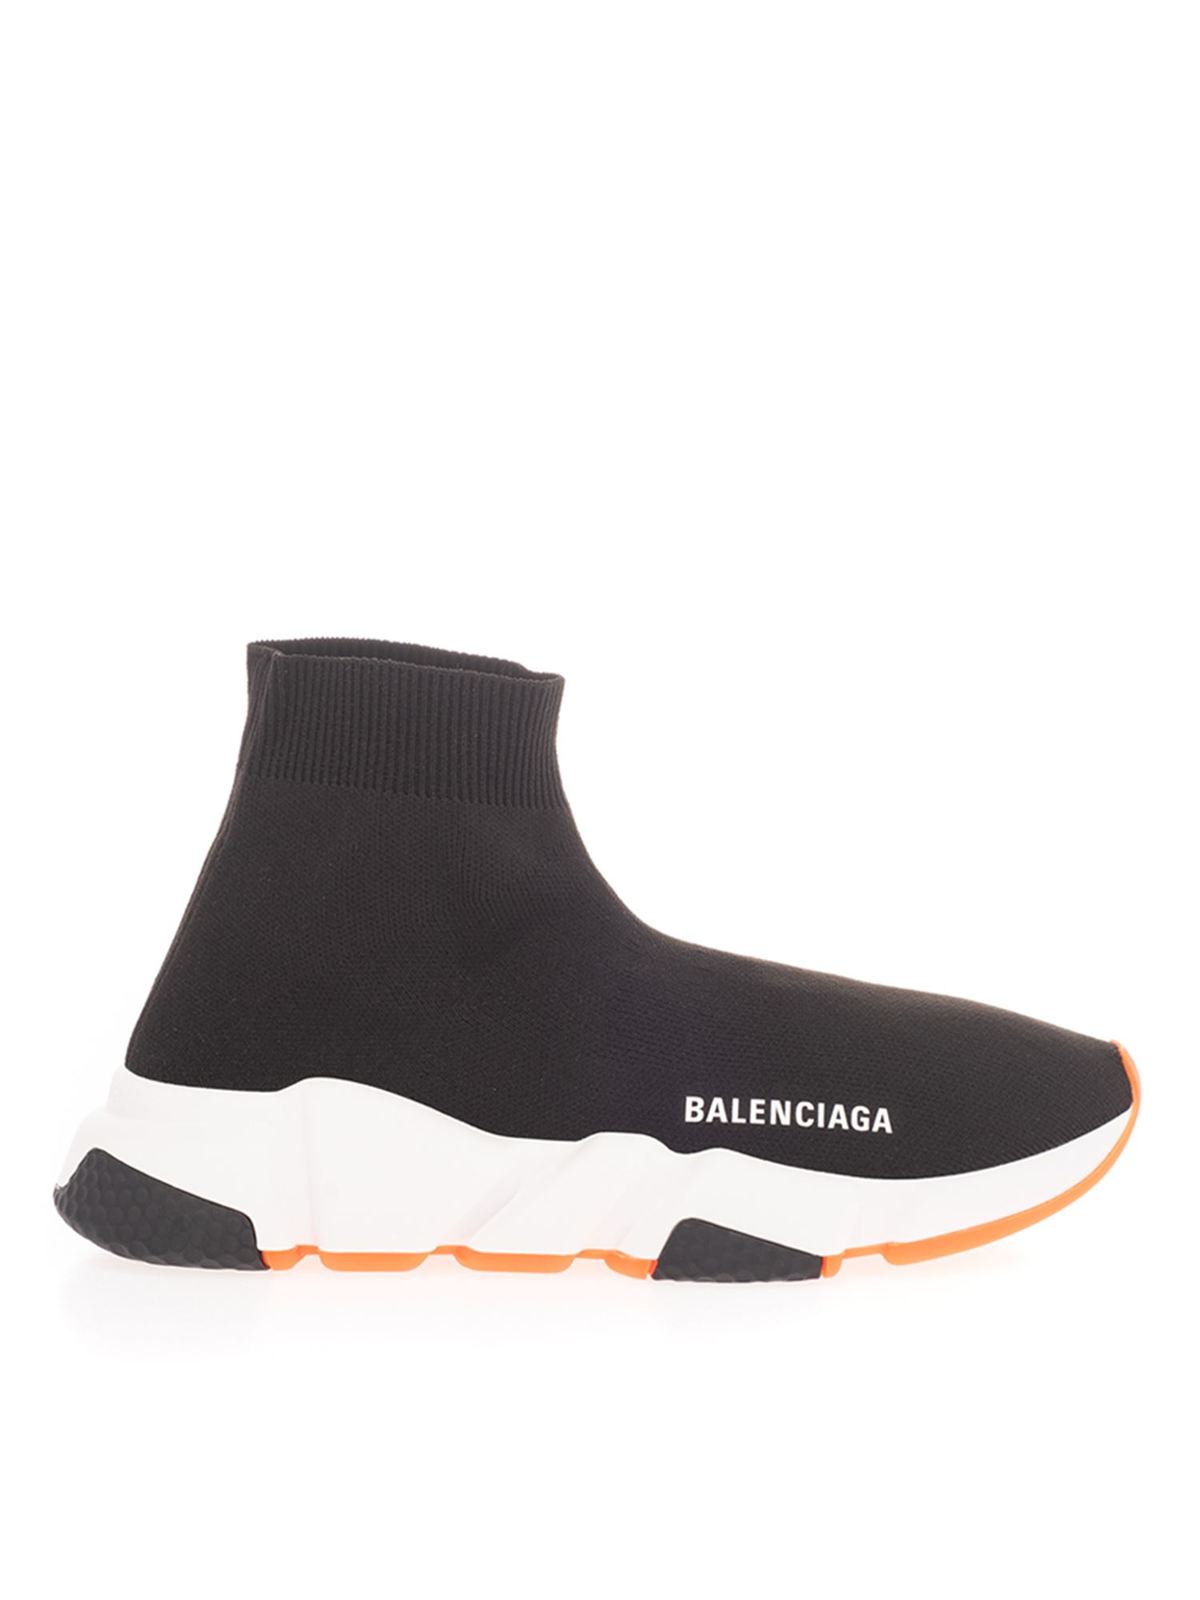 Balenciaga - Speed sneakers in black and orange - trainers ...